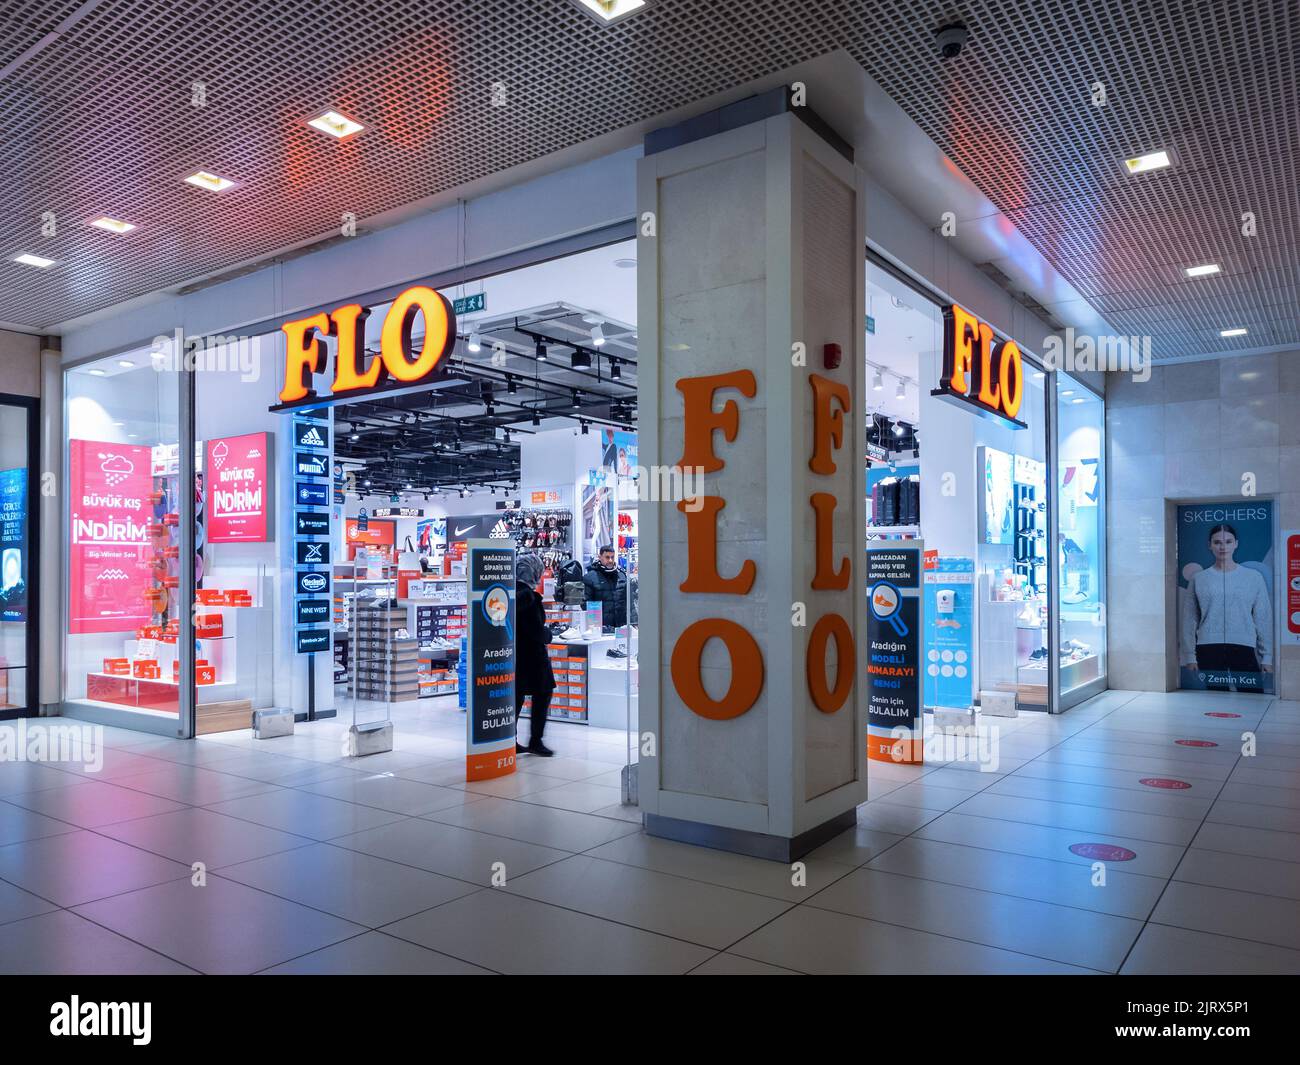 Istanbul, Turkey - Mar 20, 2022: Landscape Close-up View of FLO Footwear Store. Stock Photo